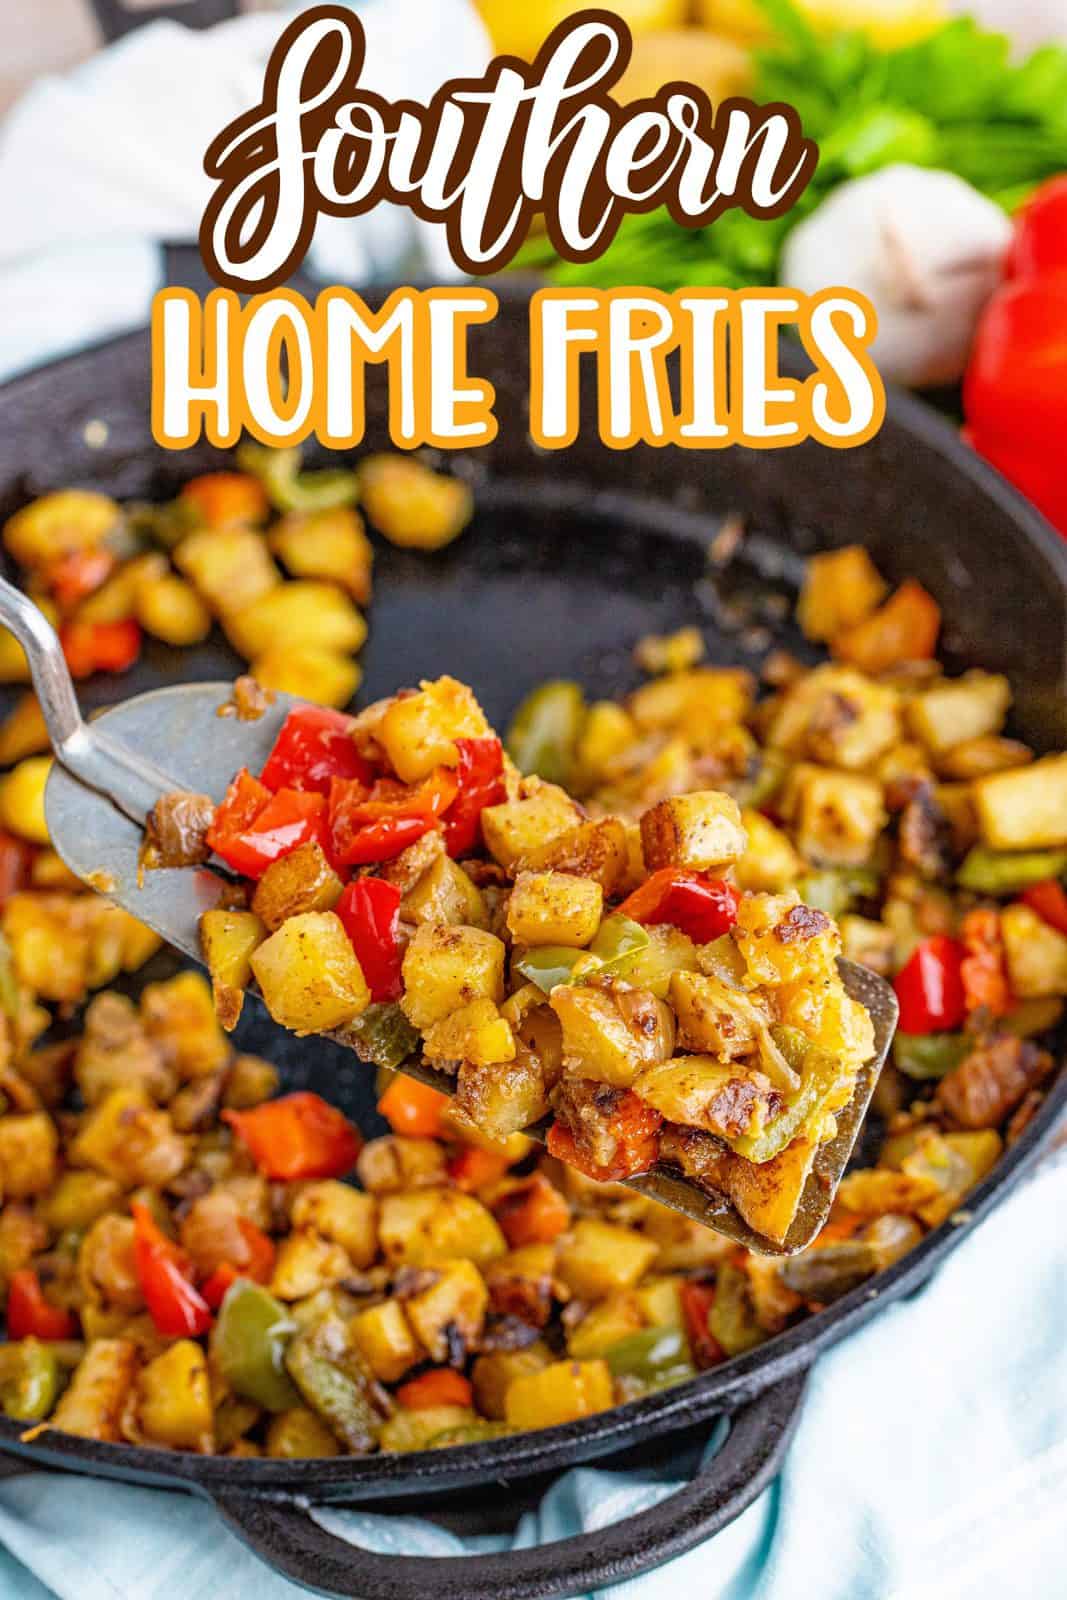 Metal spatula holding up some Southern Home Fries Pinterest image.